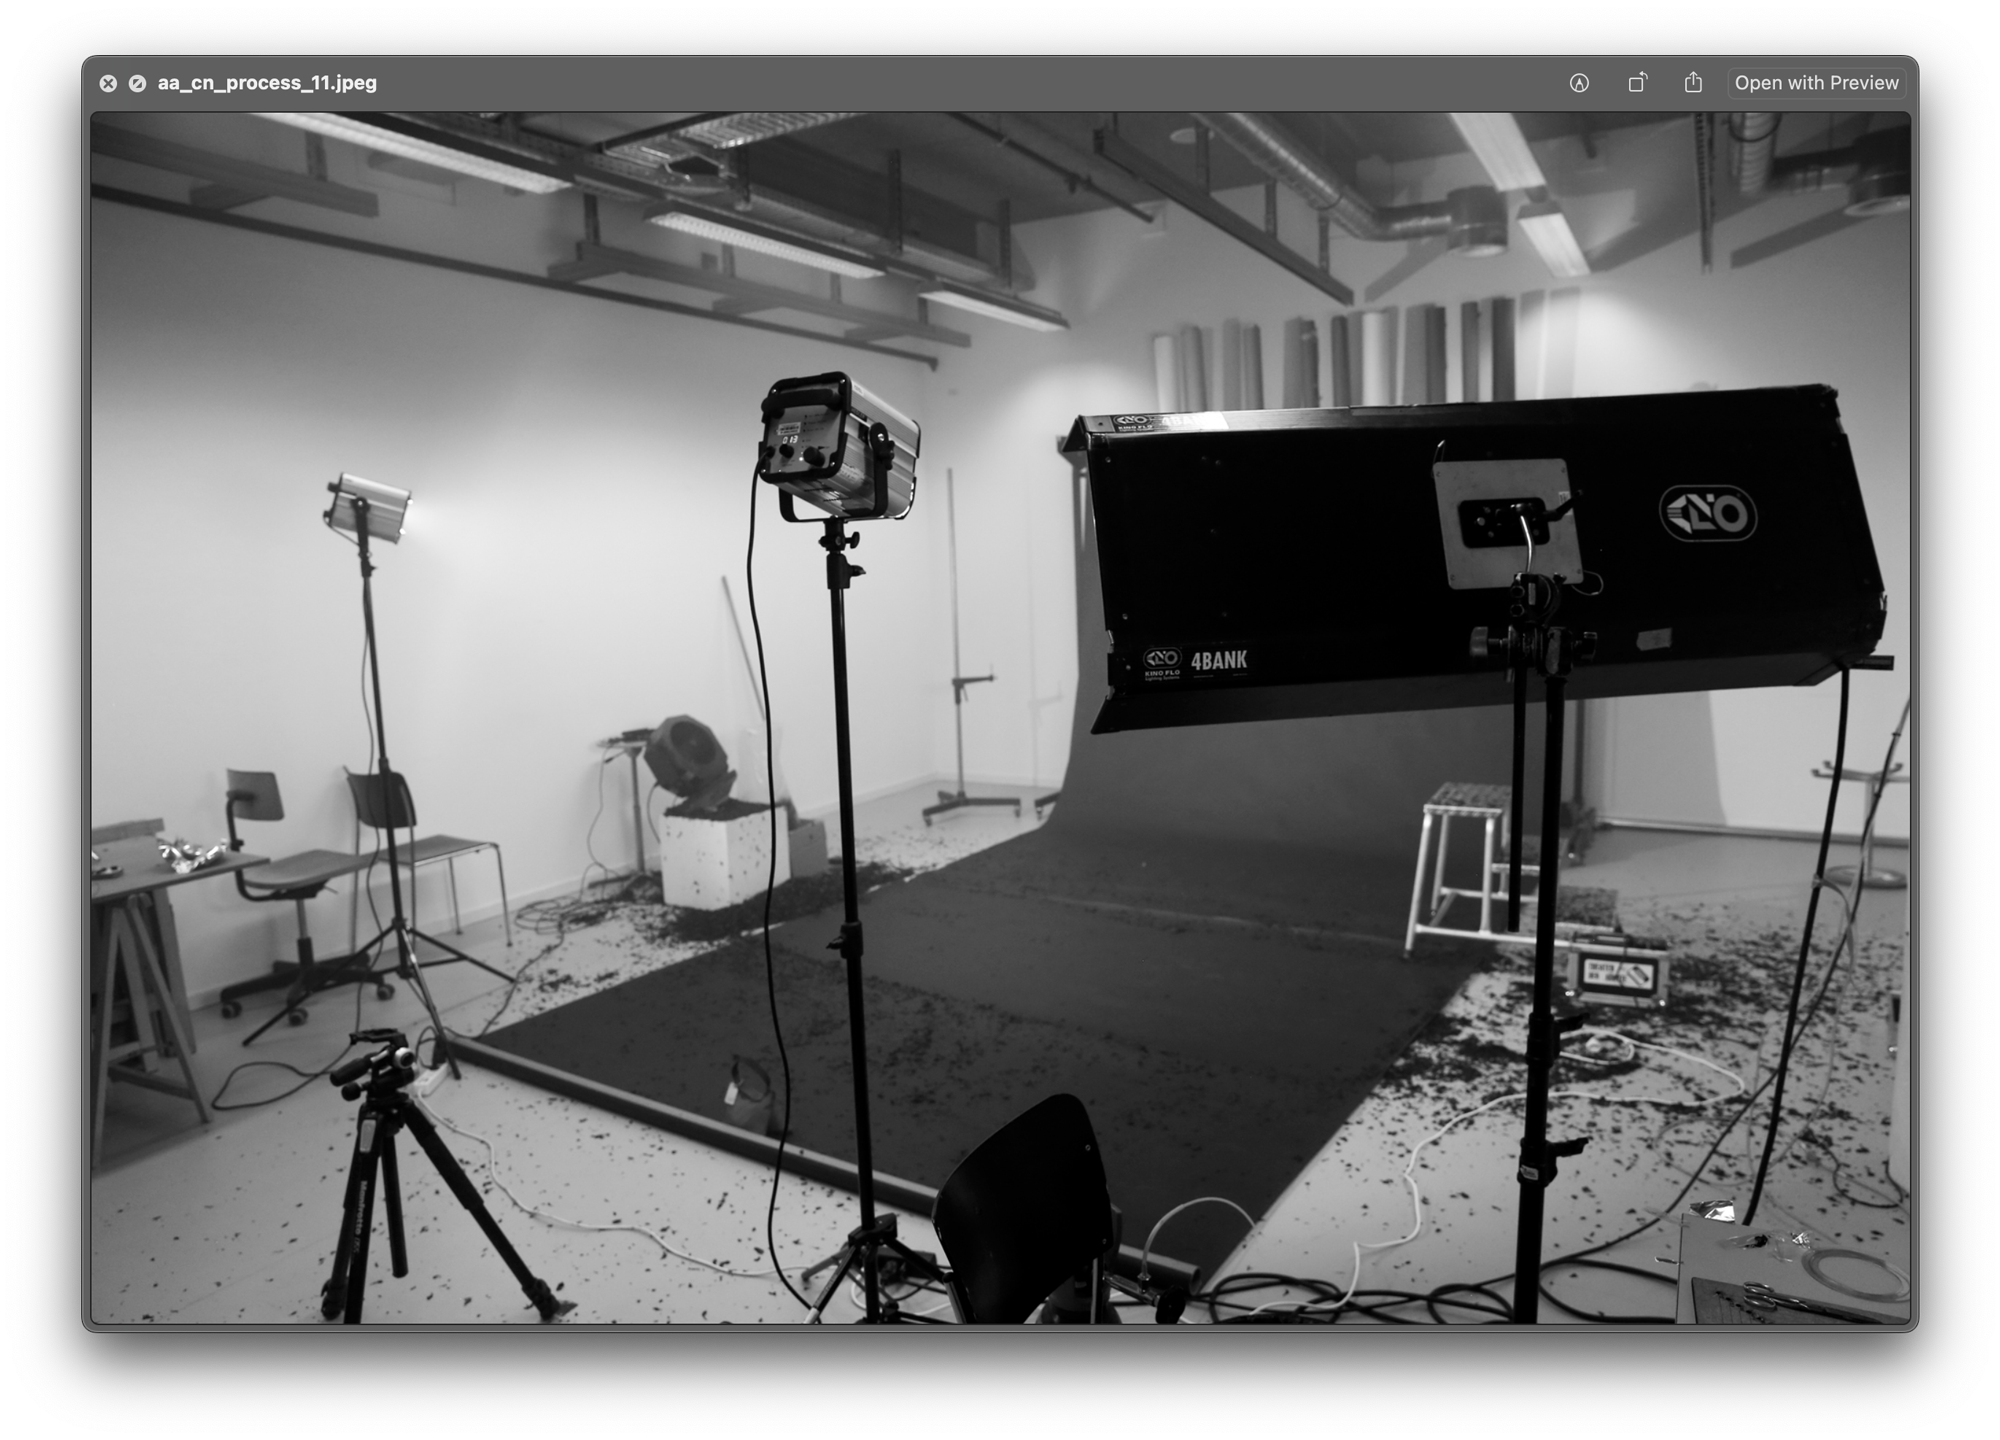 Studio after filming the short film to tales of arid'nu